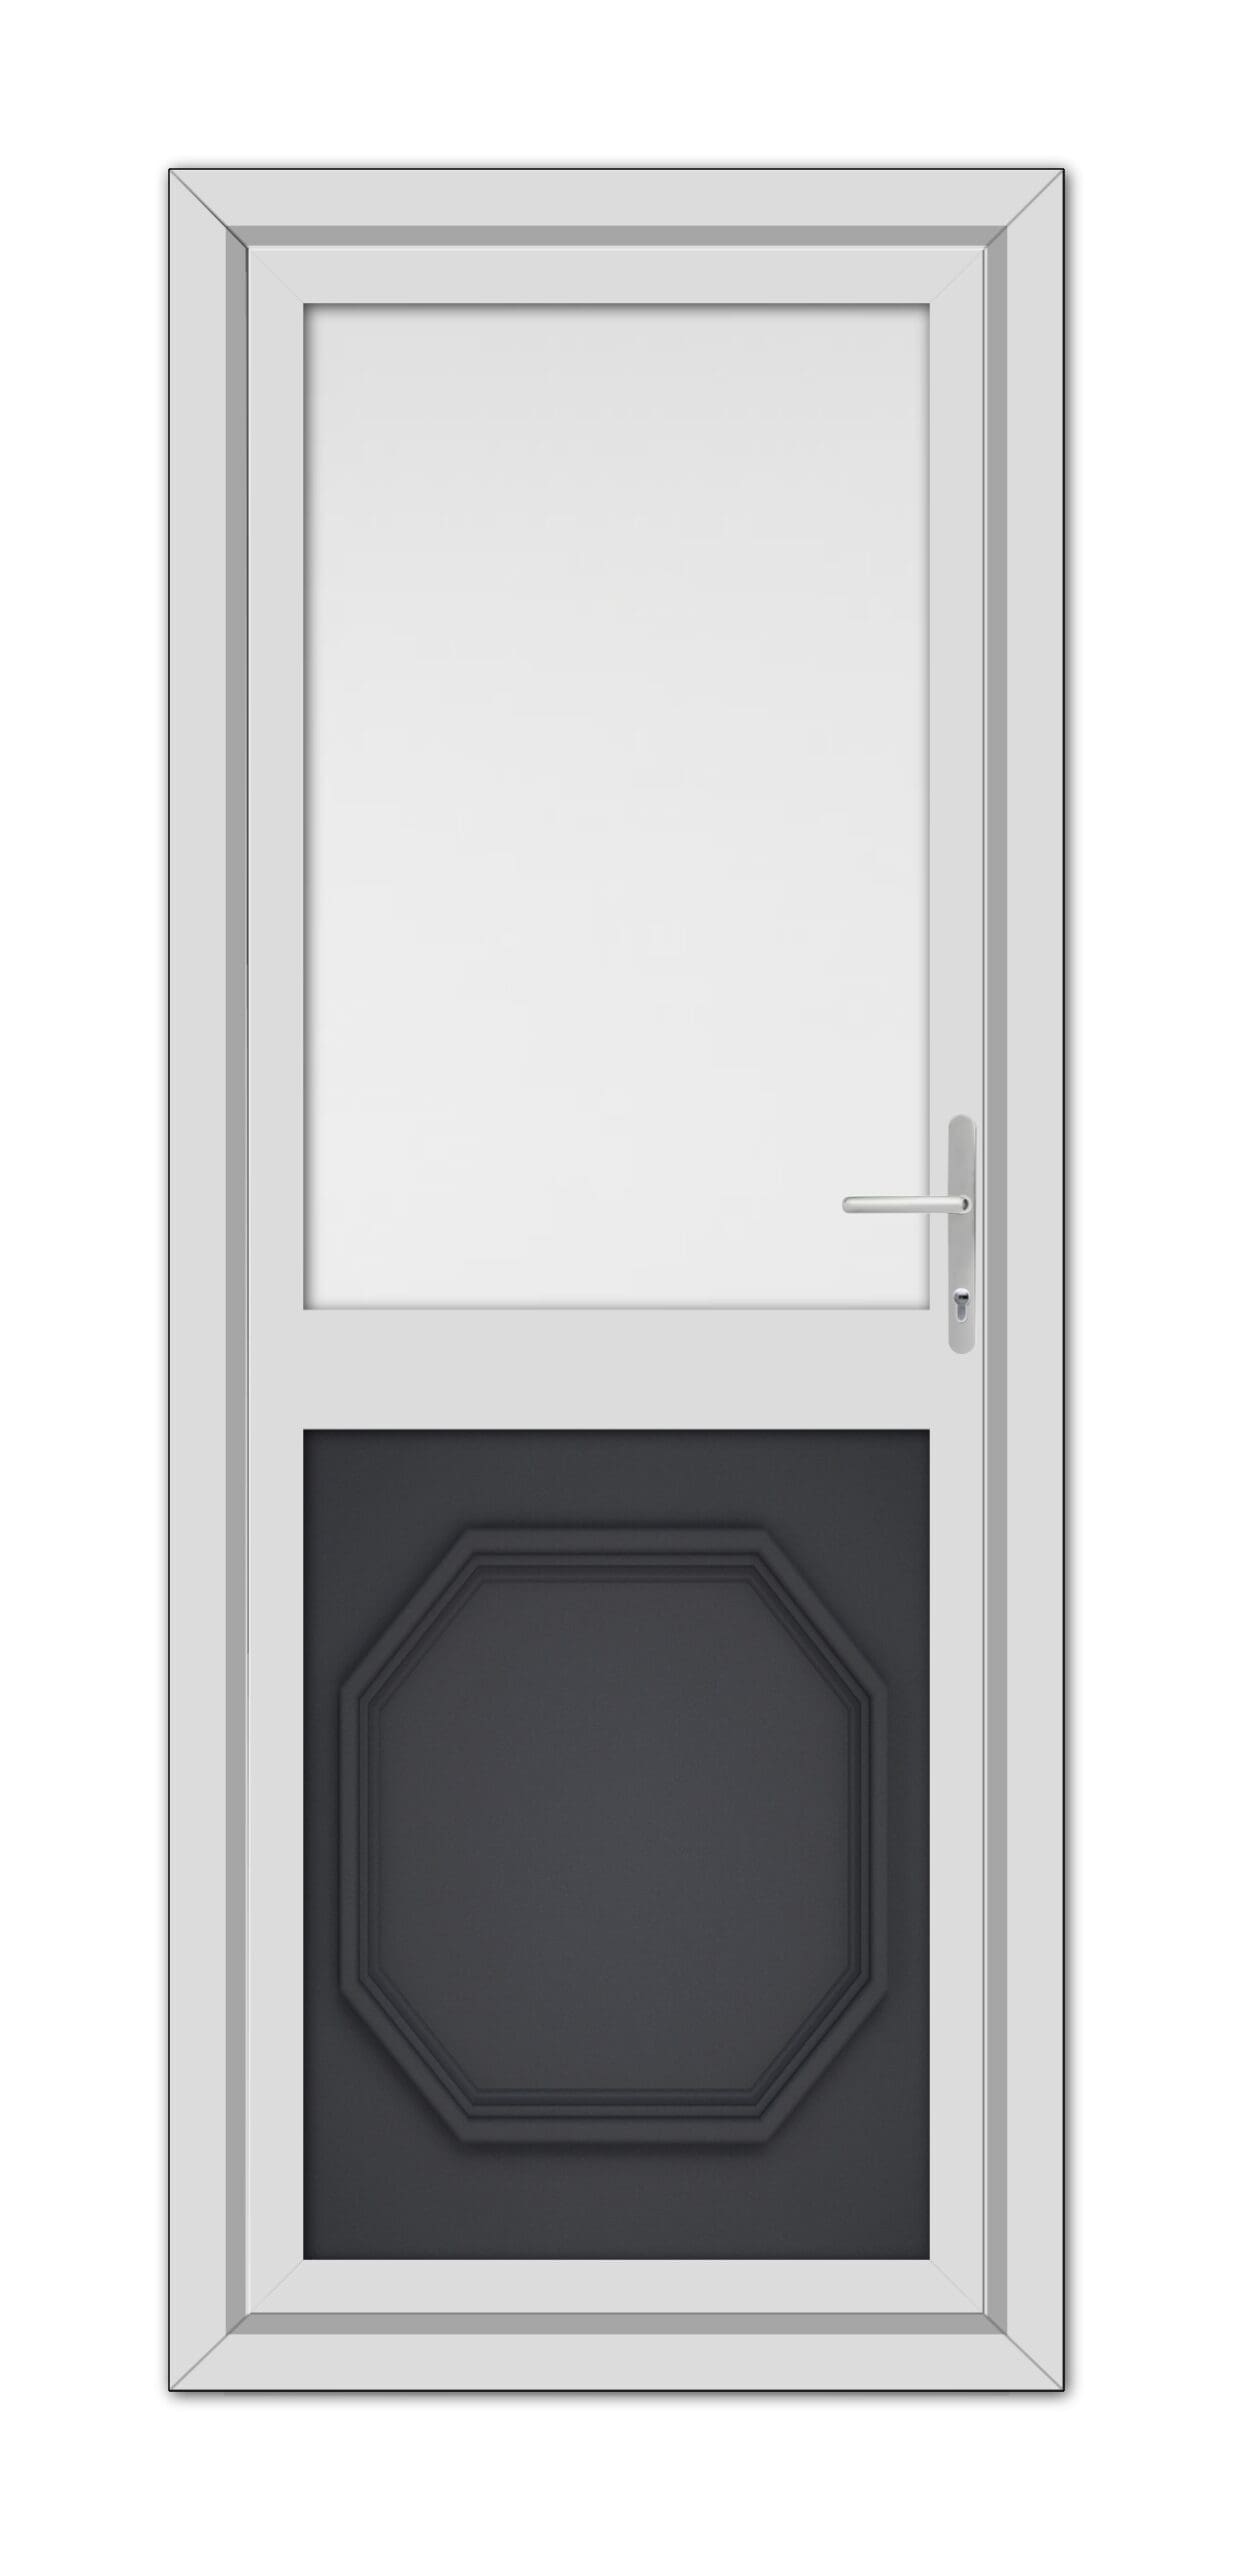 A Grey Buckingham Half uPVC Back Door, featuring a single dark panel at the bottom and a clear rectangular window at the top.